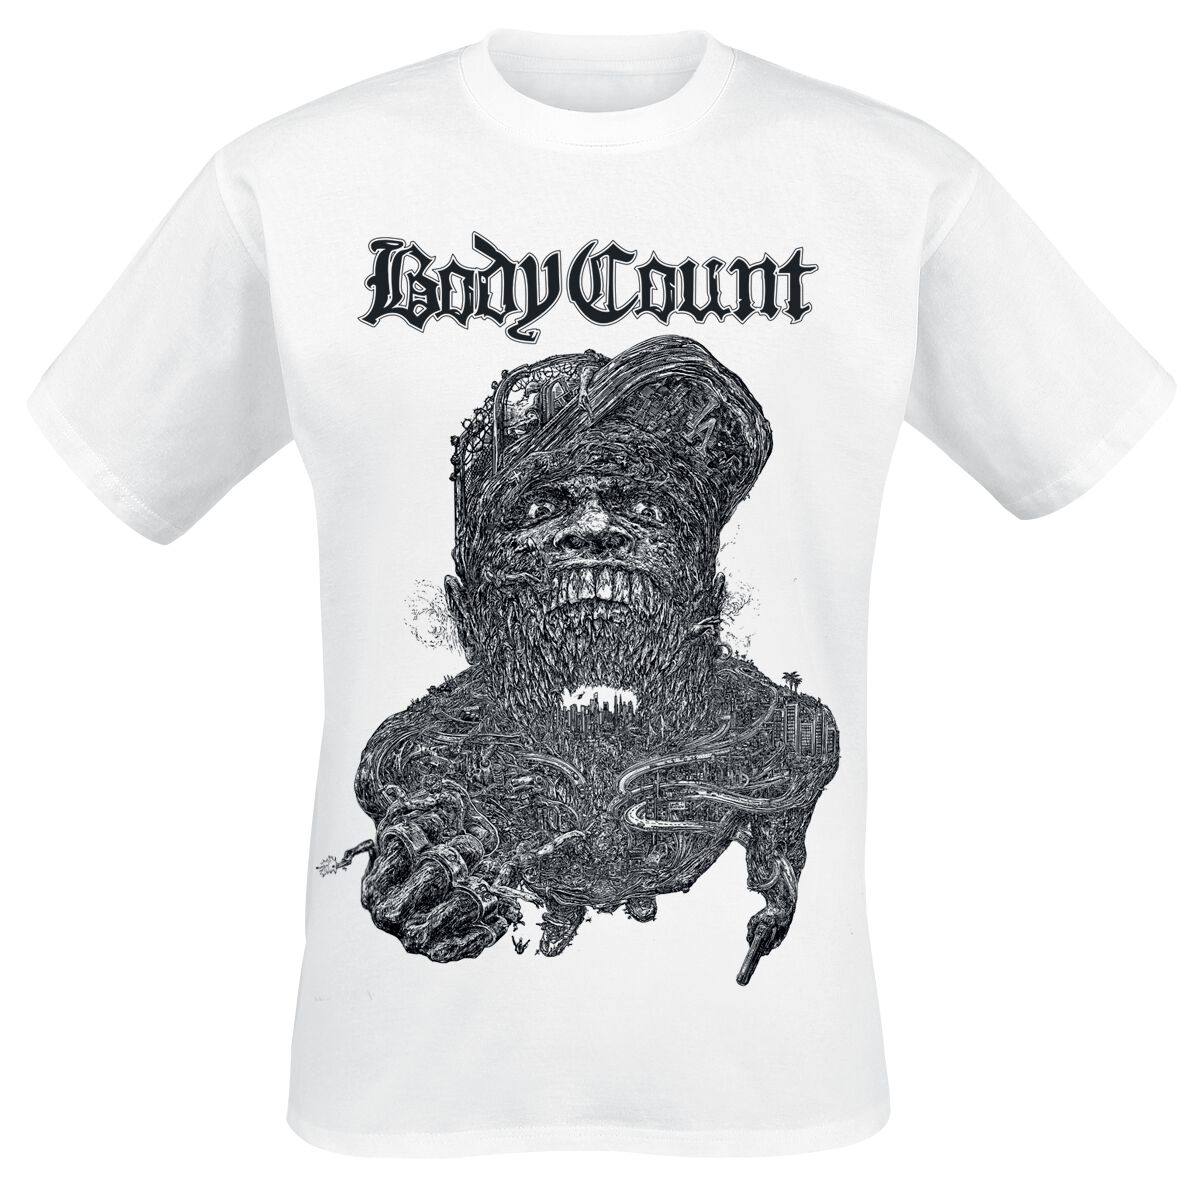 Body Count Carnivore T-Shirt white